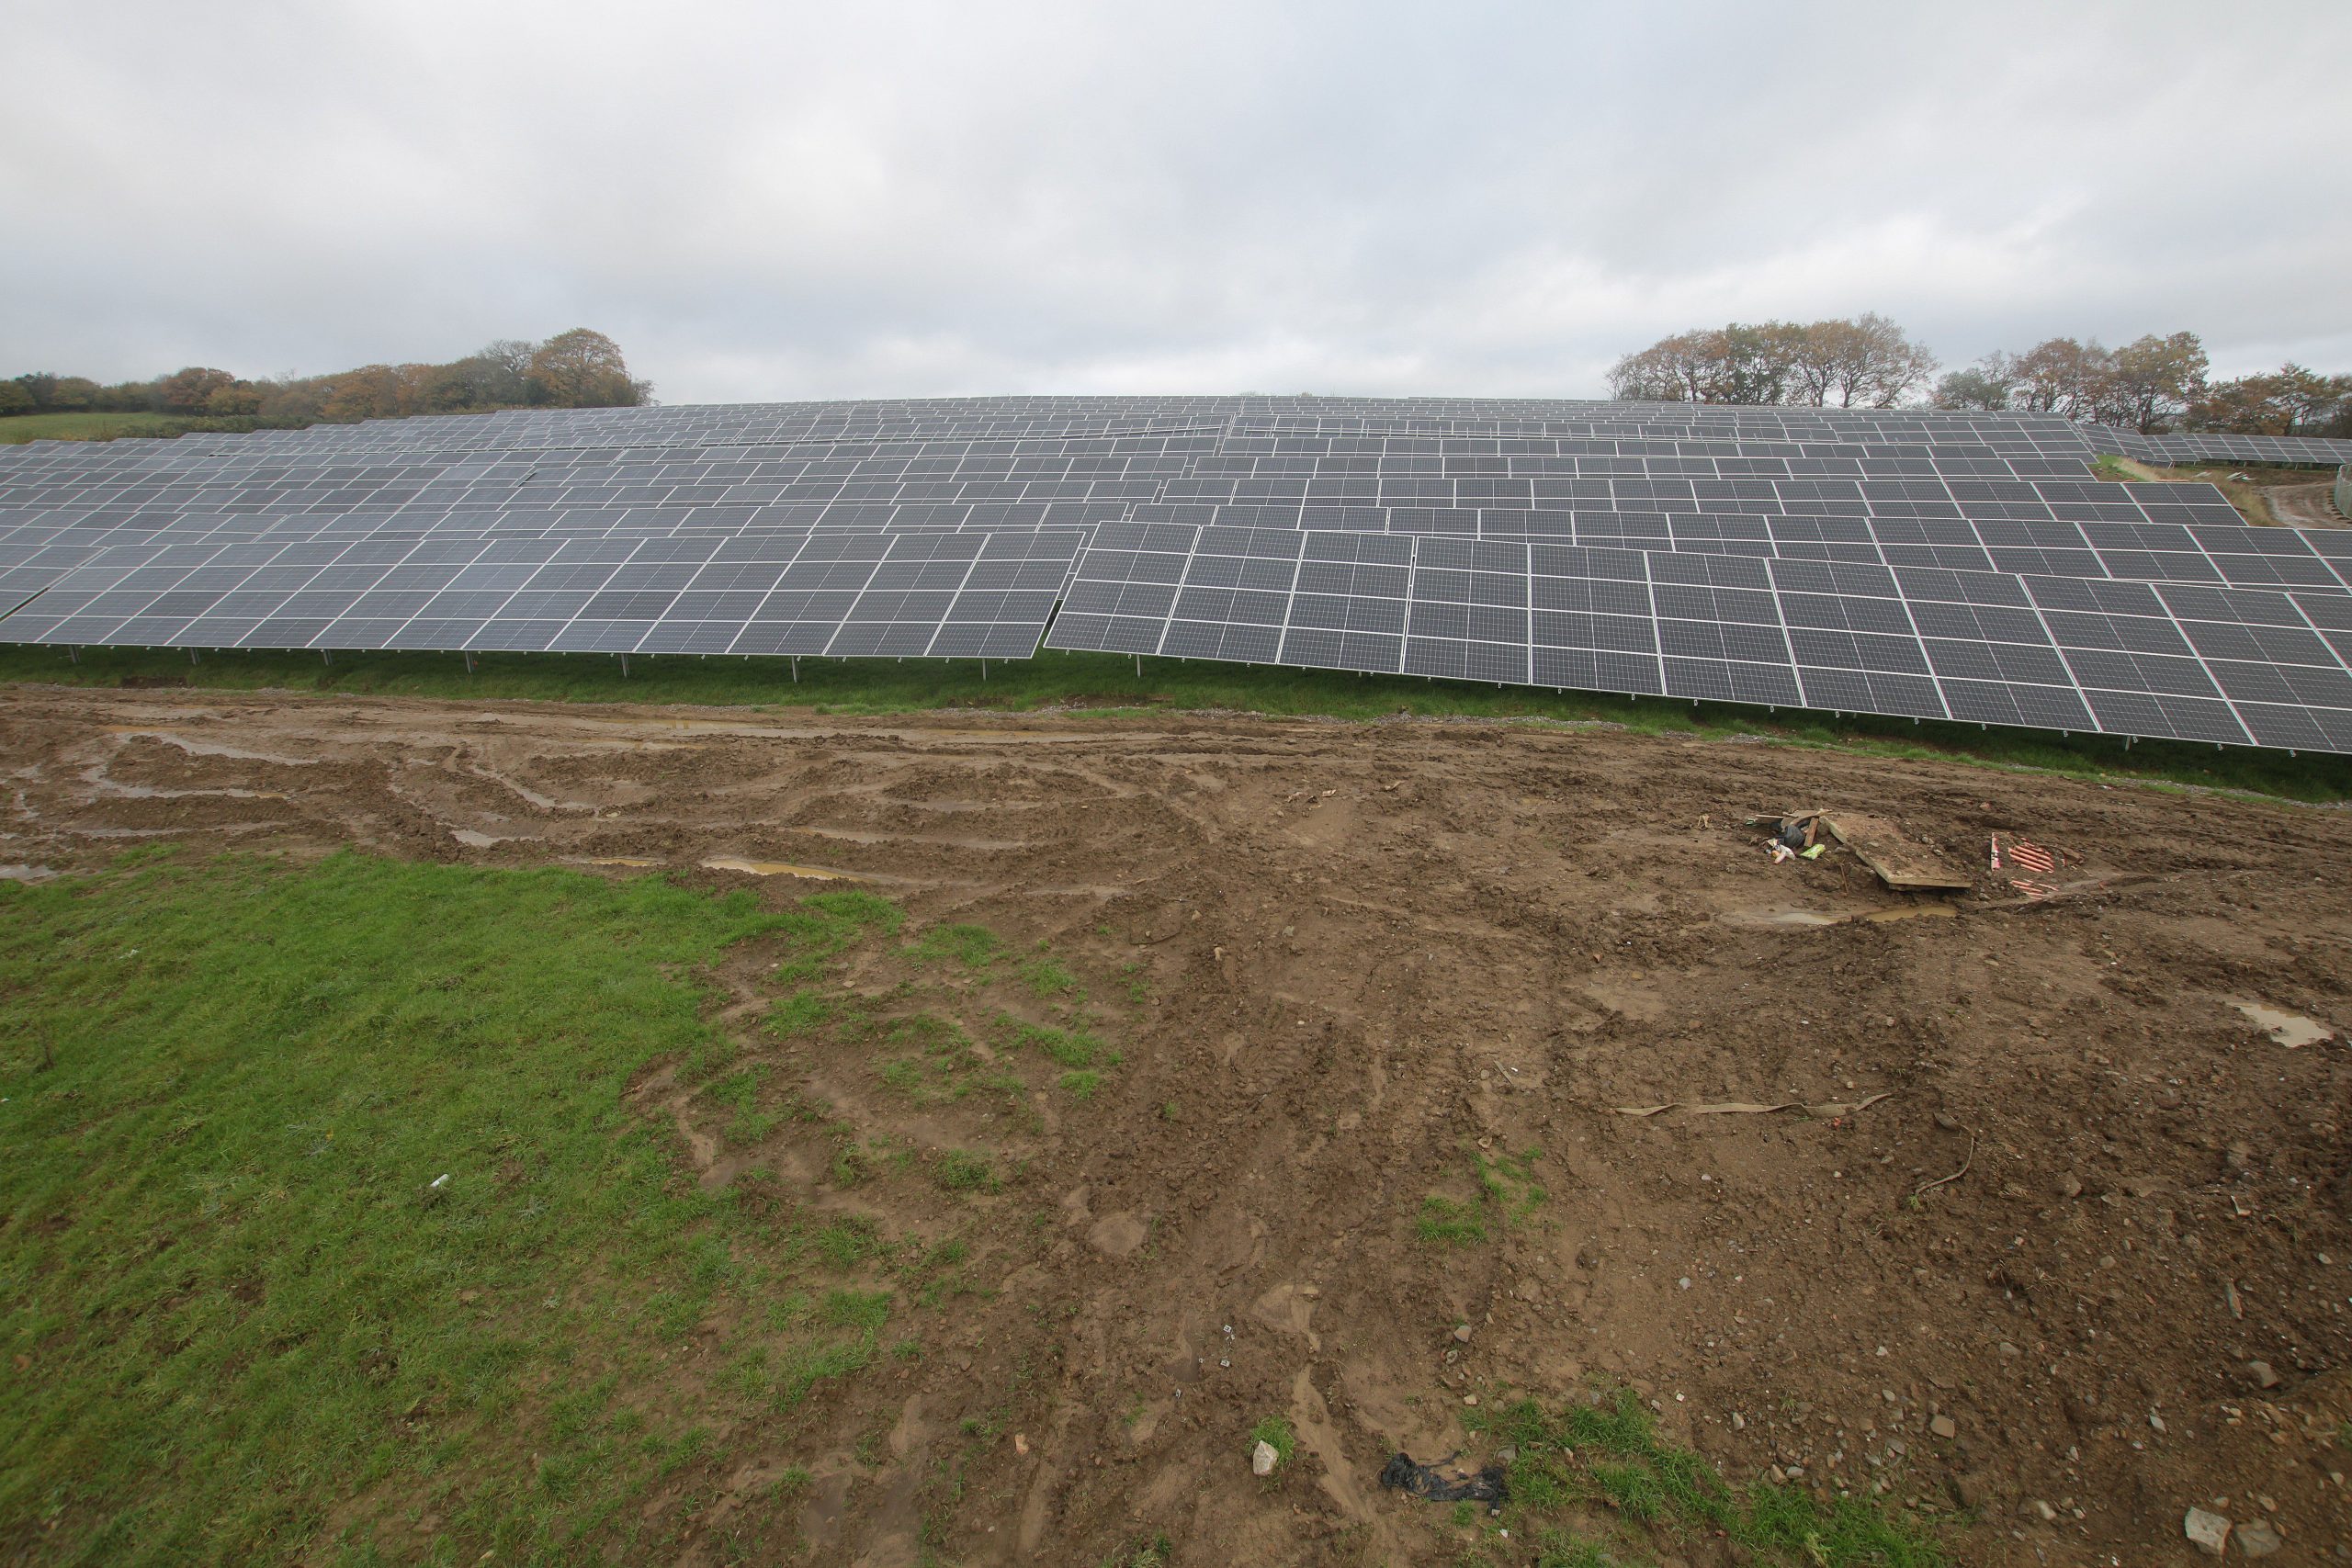 construction of a solar farm in the UK